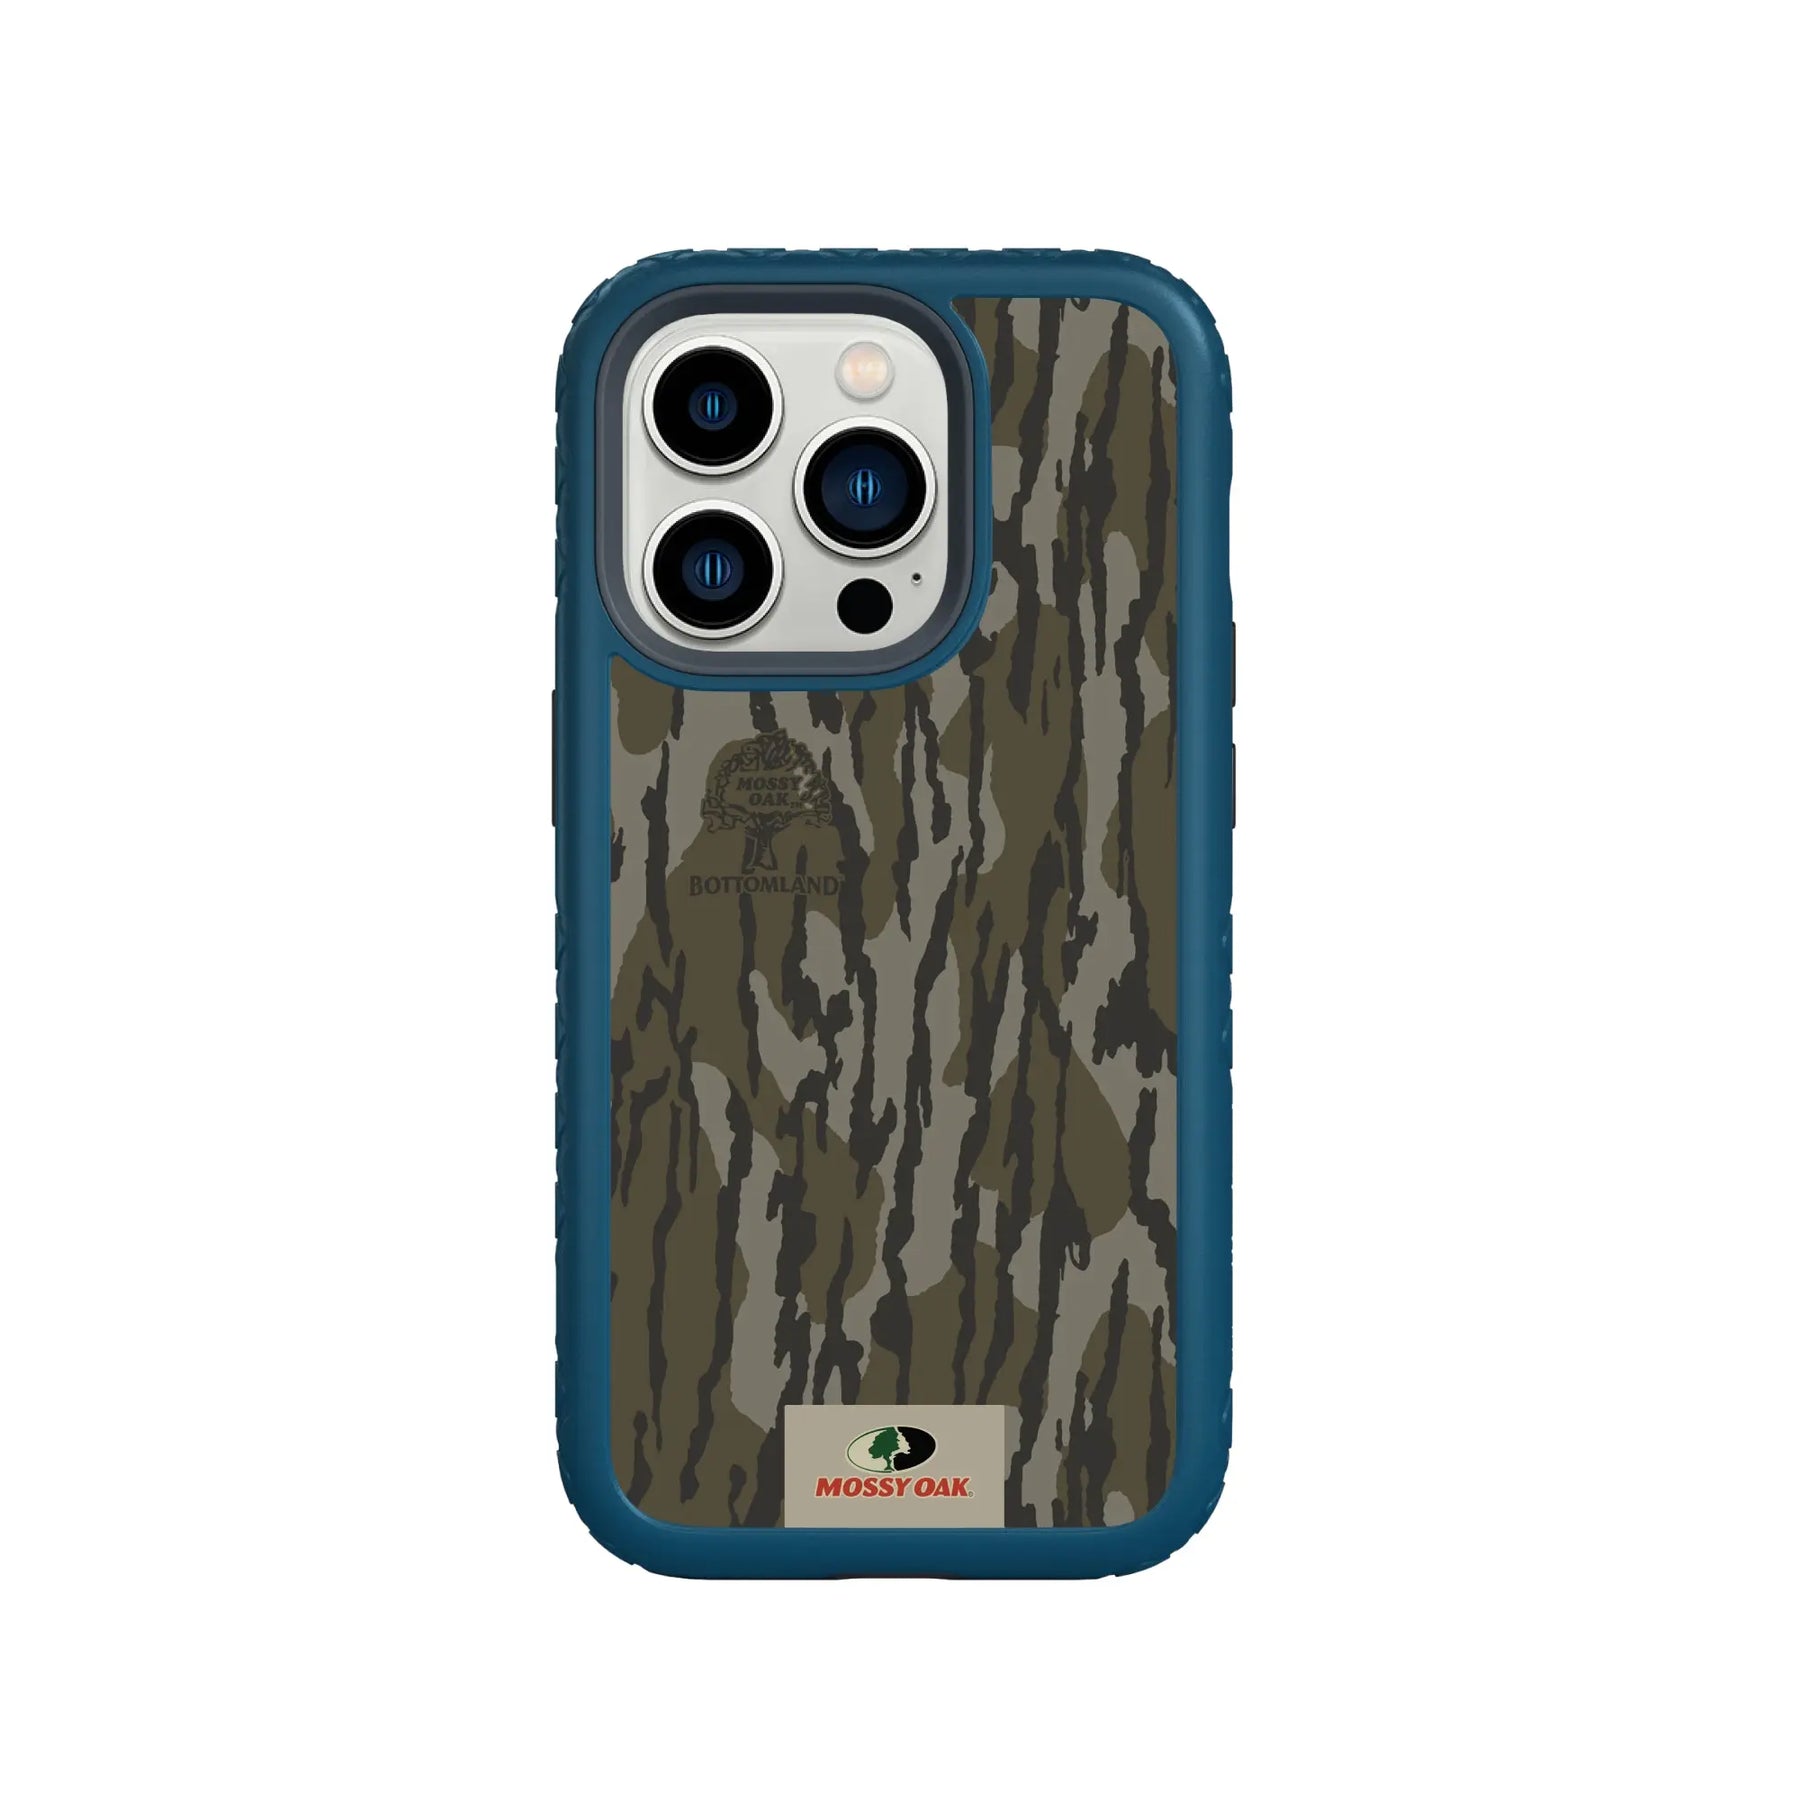 For Apple iphone 14 Pro Max 13 Pro iphone 11 Case iphone 12 Pro